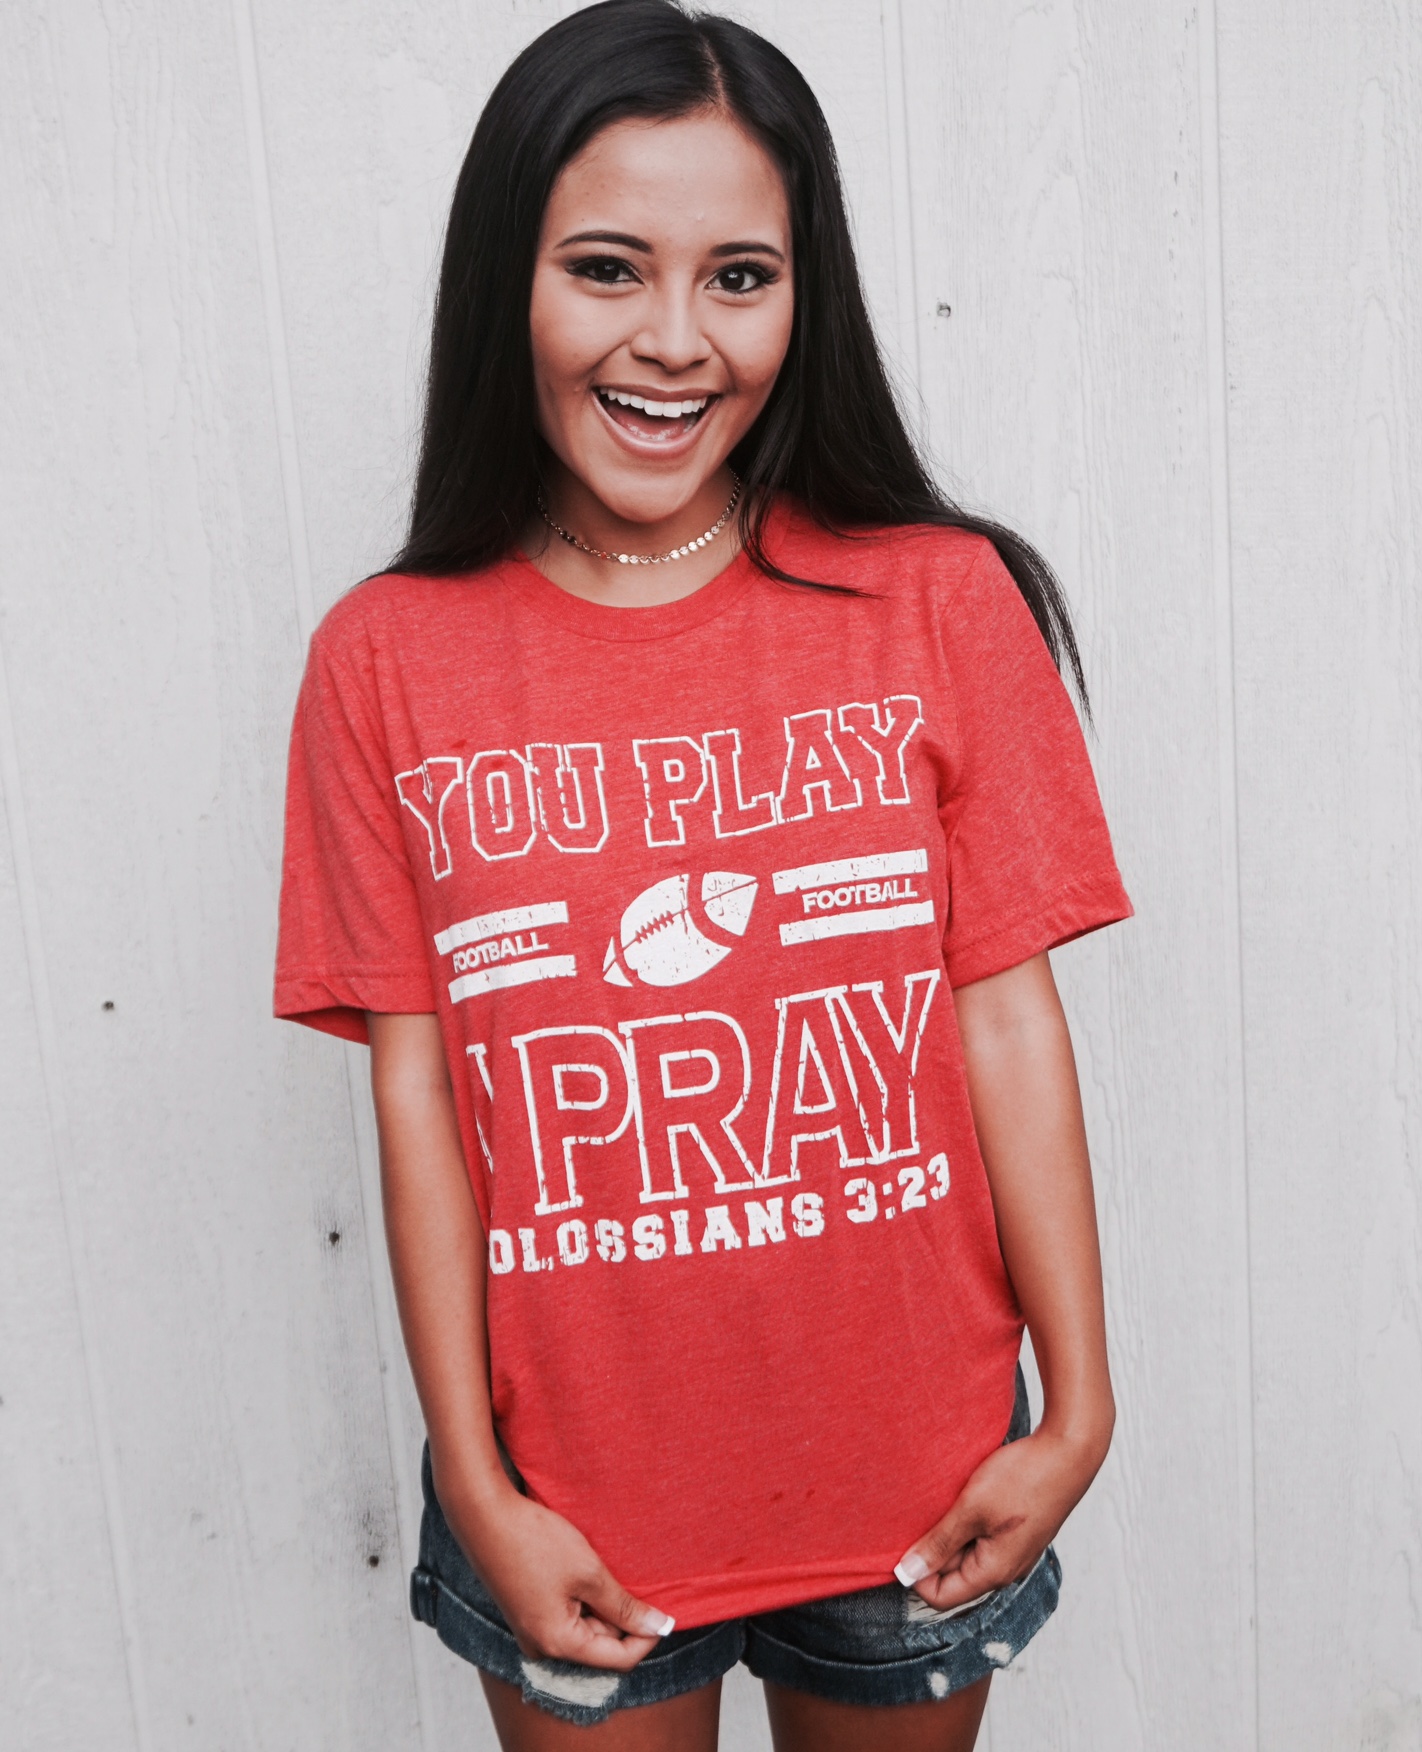 YPIP Stripe Football Tee- Color Options | You Play I Pray